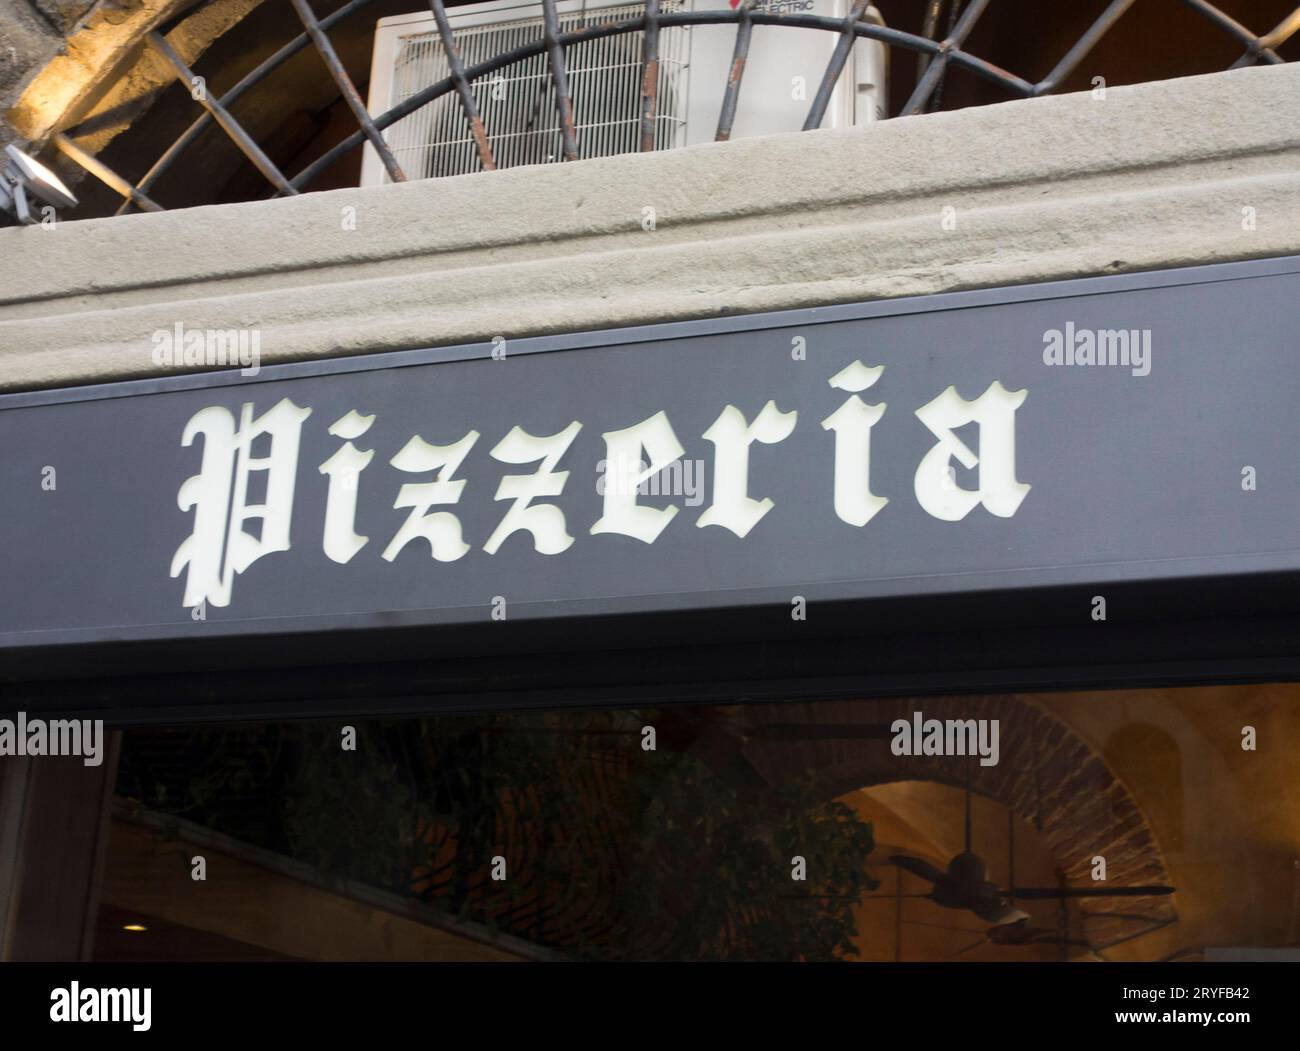 A pizzeria or pizzaria sign Stock Photo